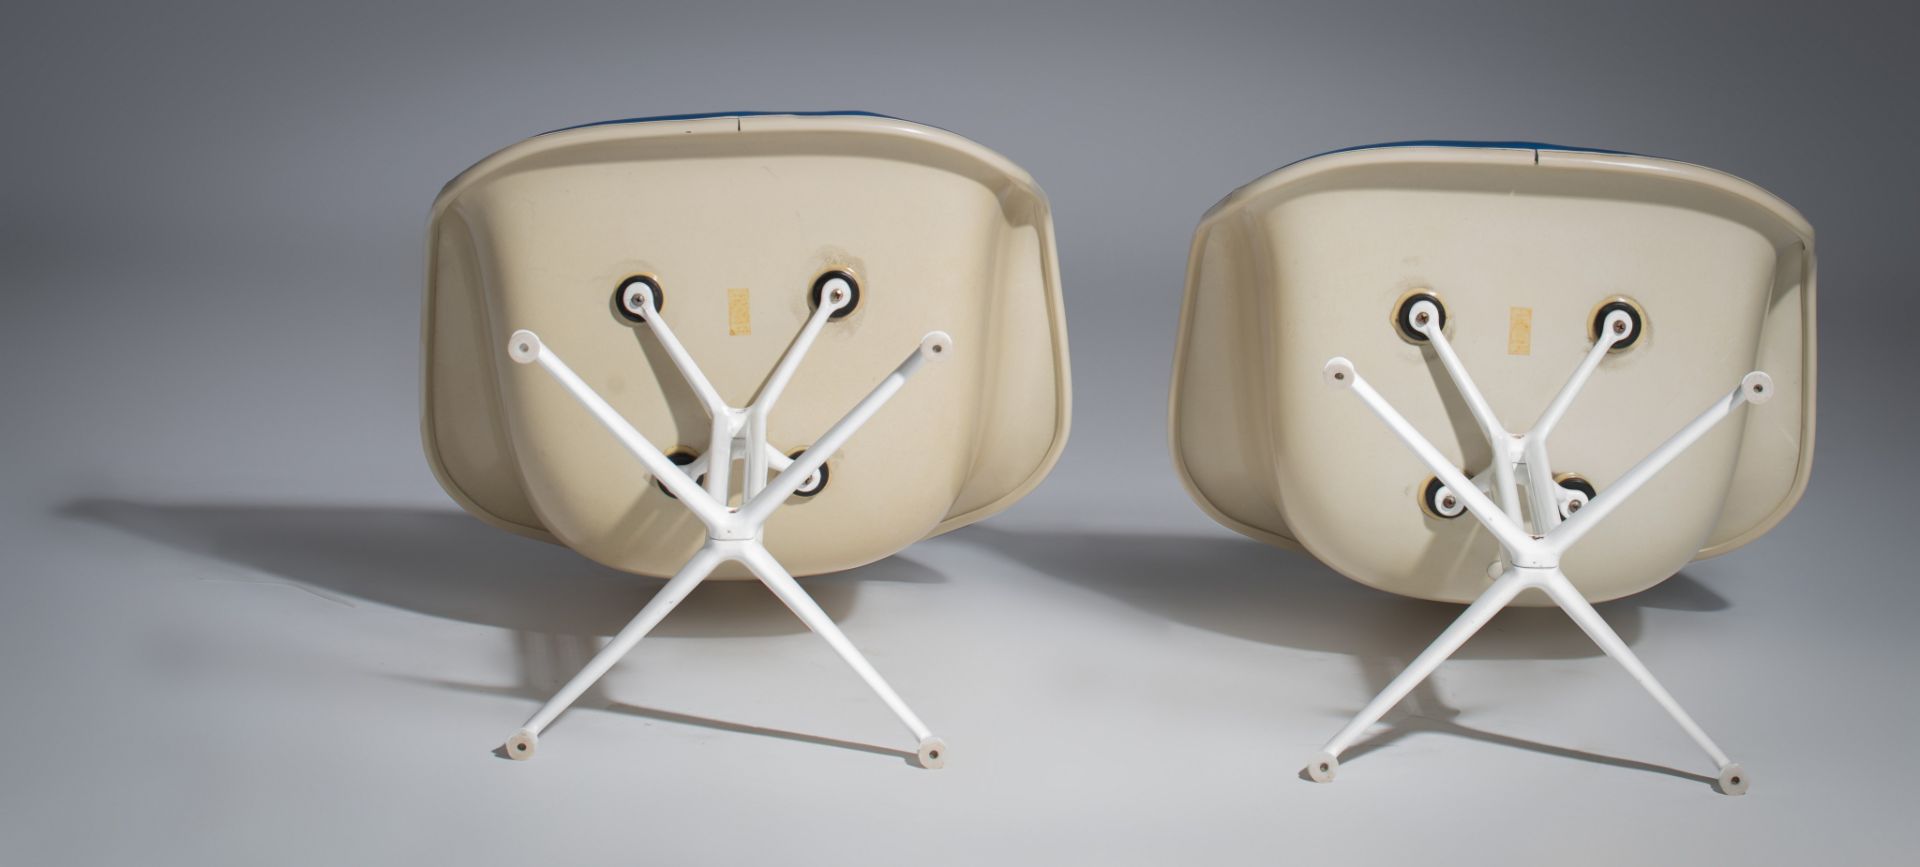 A fine set of six dining chairs by Charles and Ray Eames for Herman Miller, USA, 1960s, H 83 - 85 - - Image 13 of 16